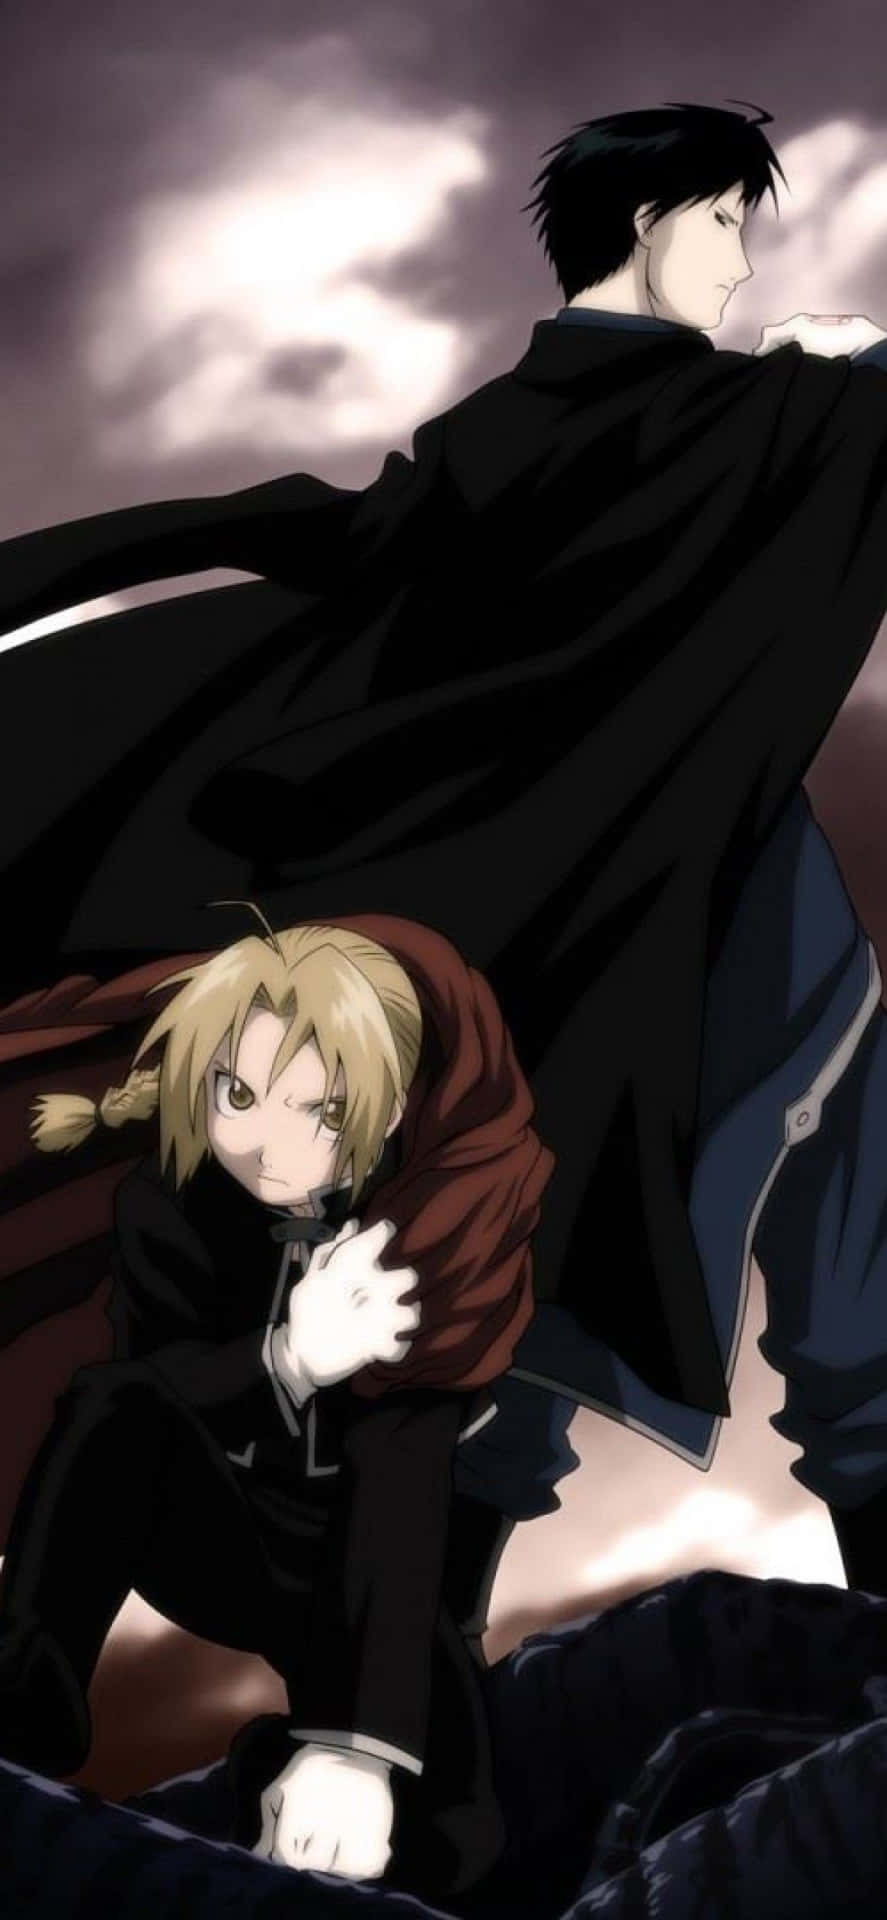 Edward Elric Displaying His Alchemy Prowess In Action Background